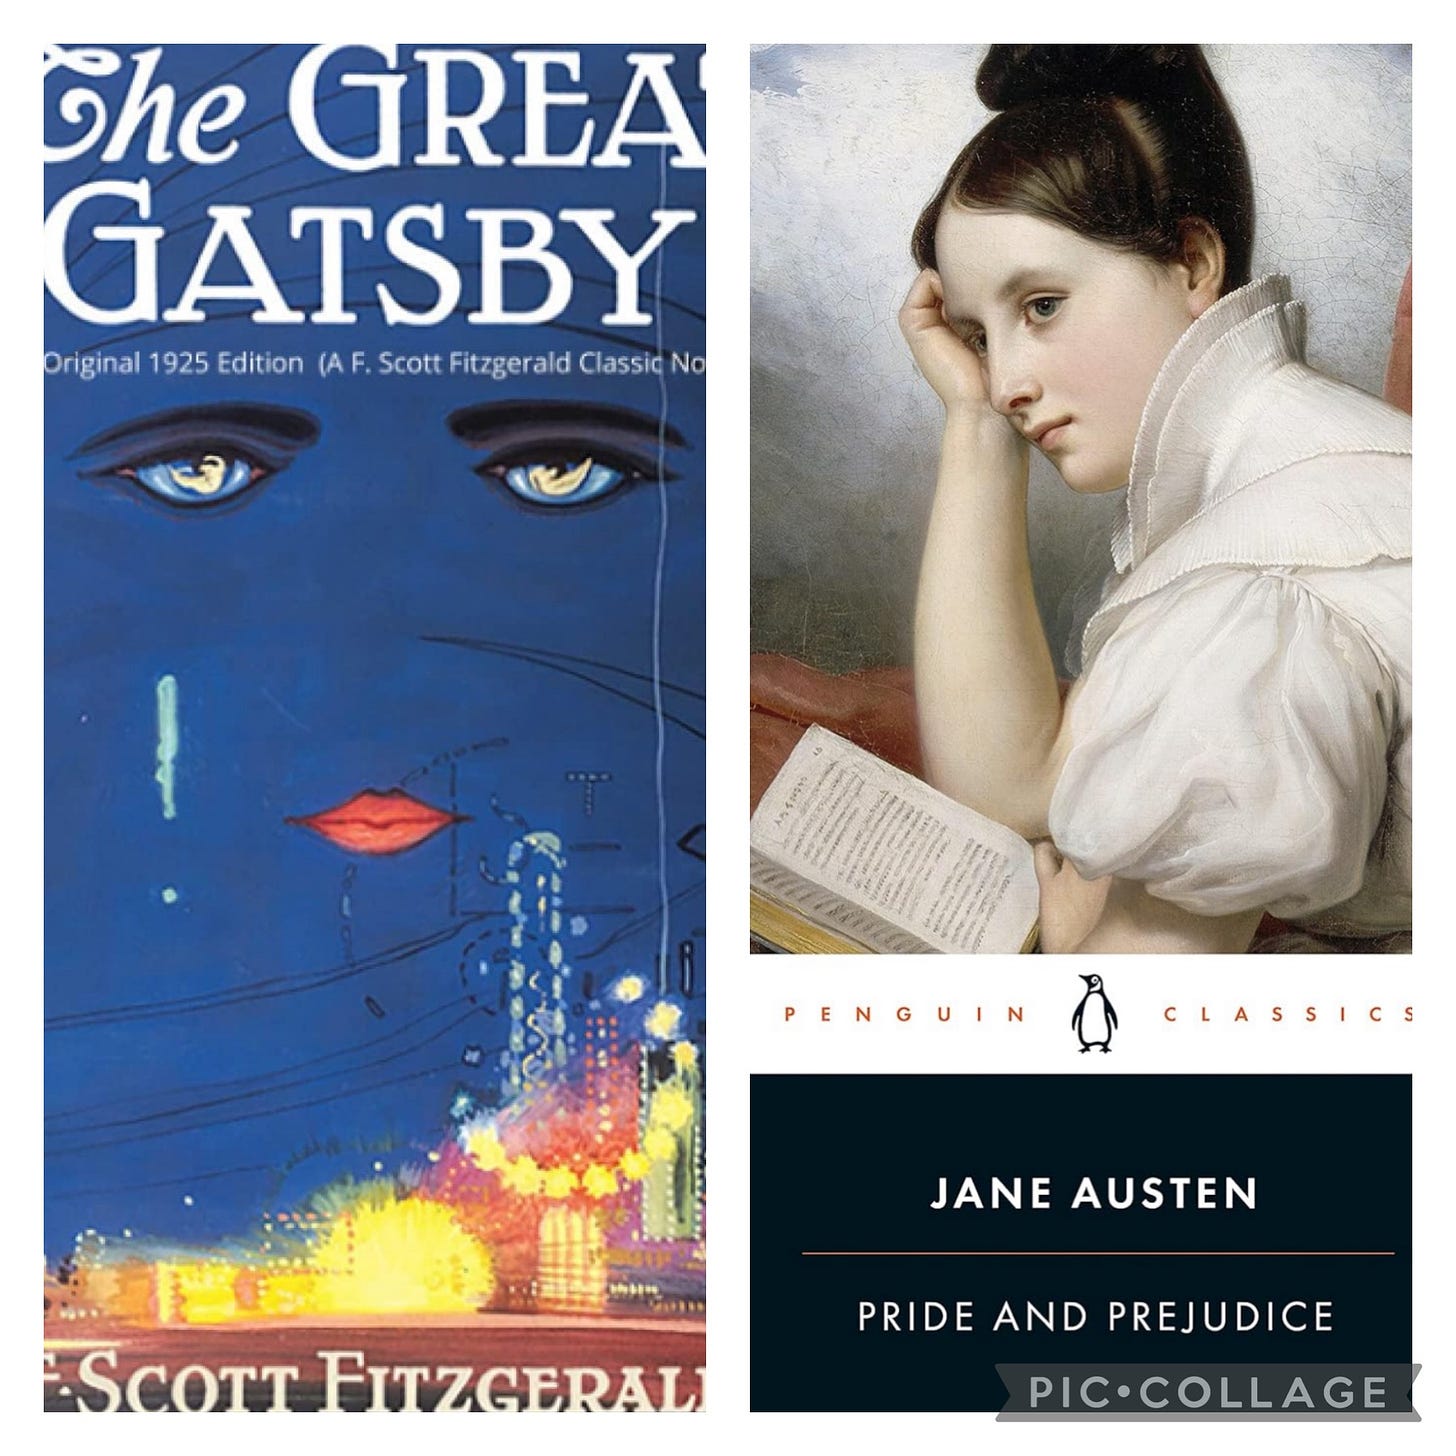 Image of the cover of The Great Gatsby next to the cover of Pride and Prejudice